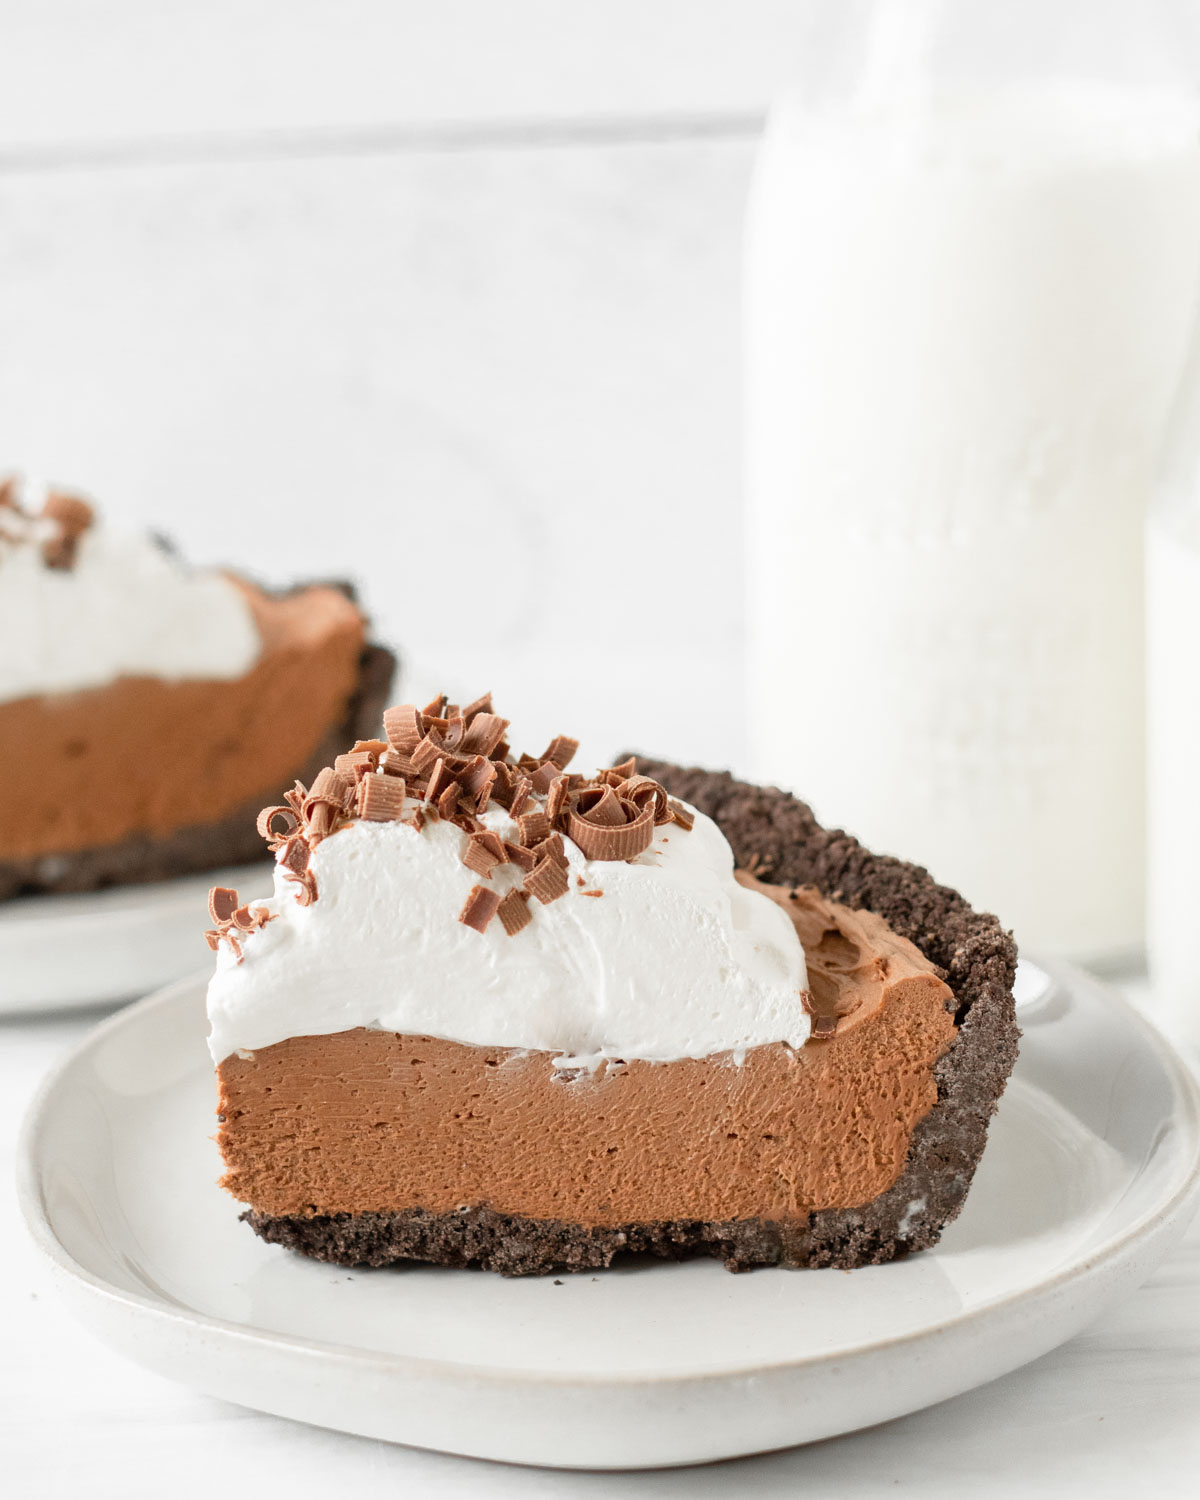 This French Silk Pie is a decadent chocolate pie recipe made with a chocolate crust, rich chocolate mousse filling and whipped cream topping. This homemade pie is our favorite holiday dessert recipe for Thanksgiving and Christmas.